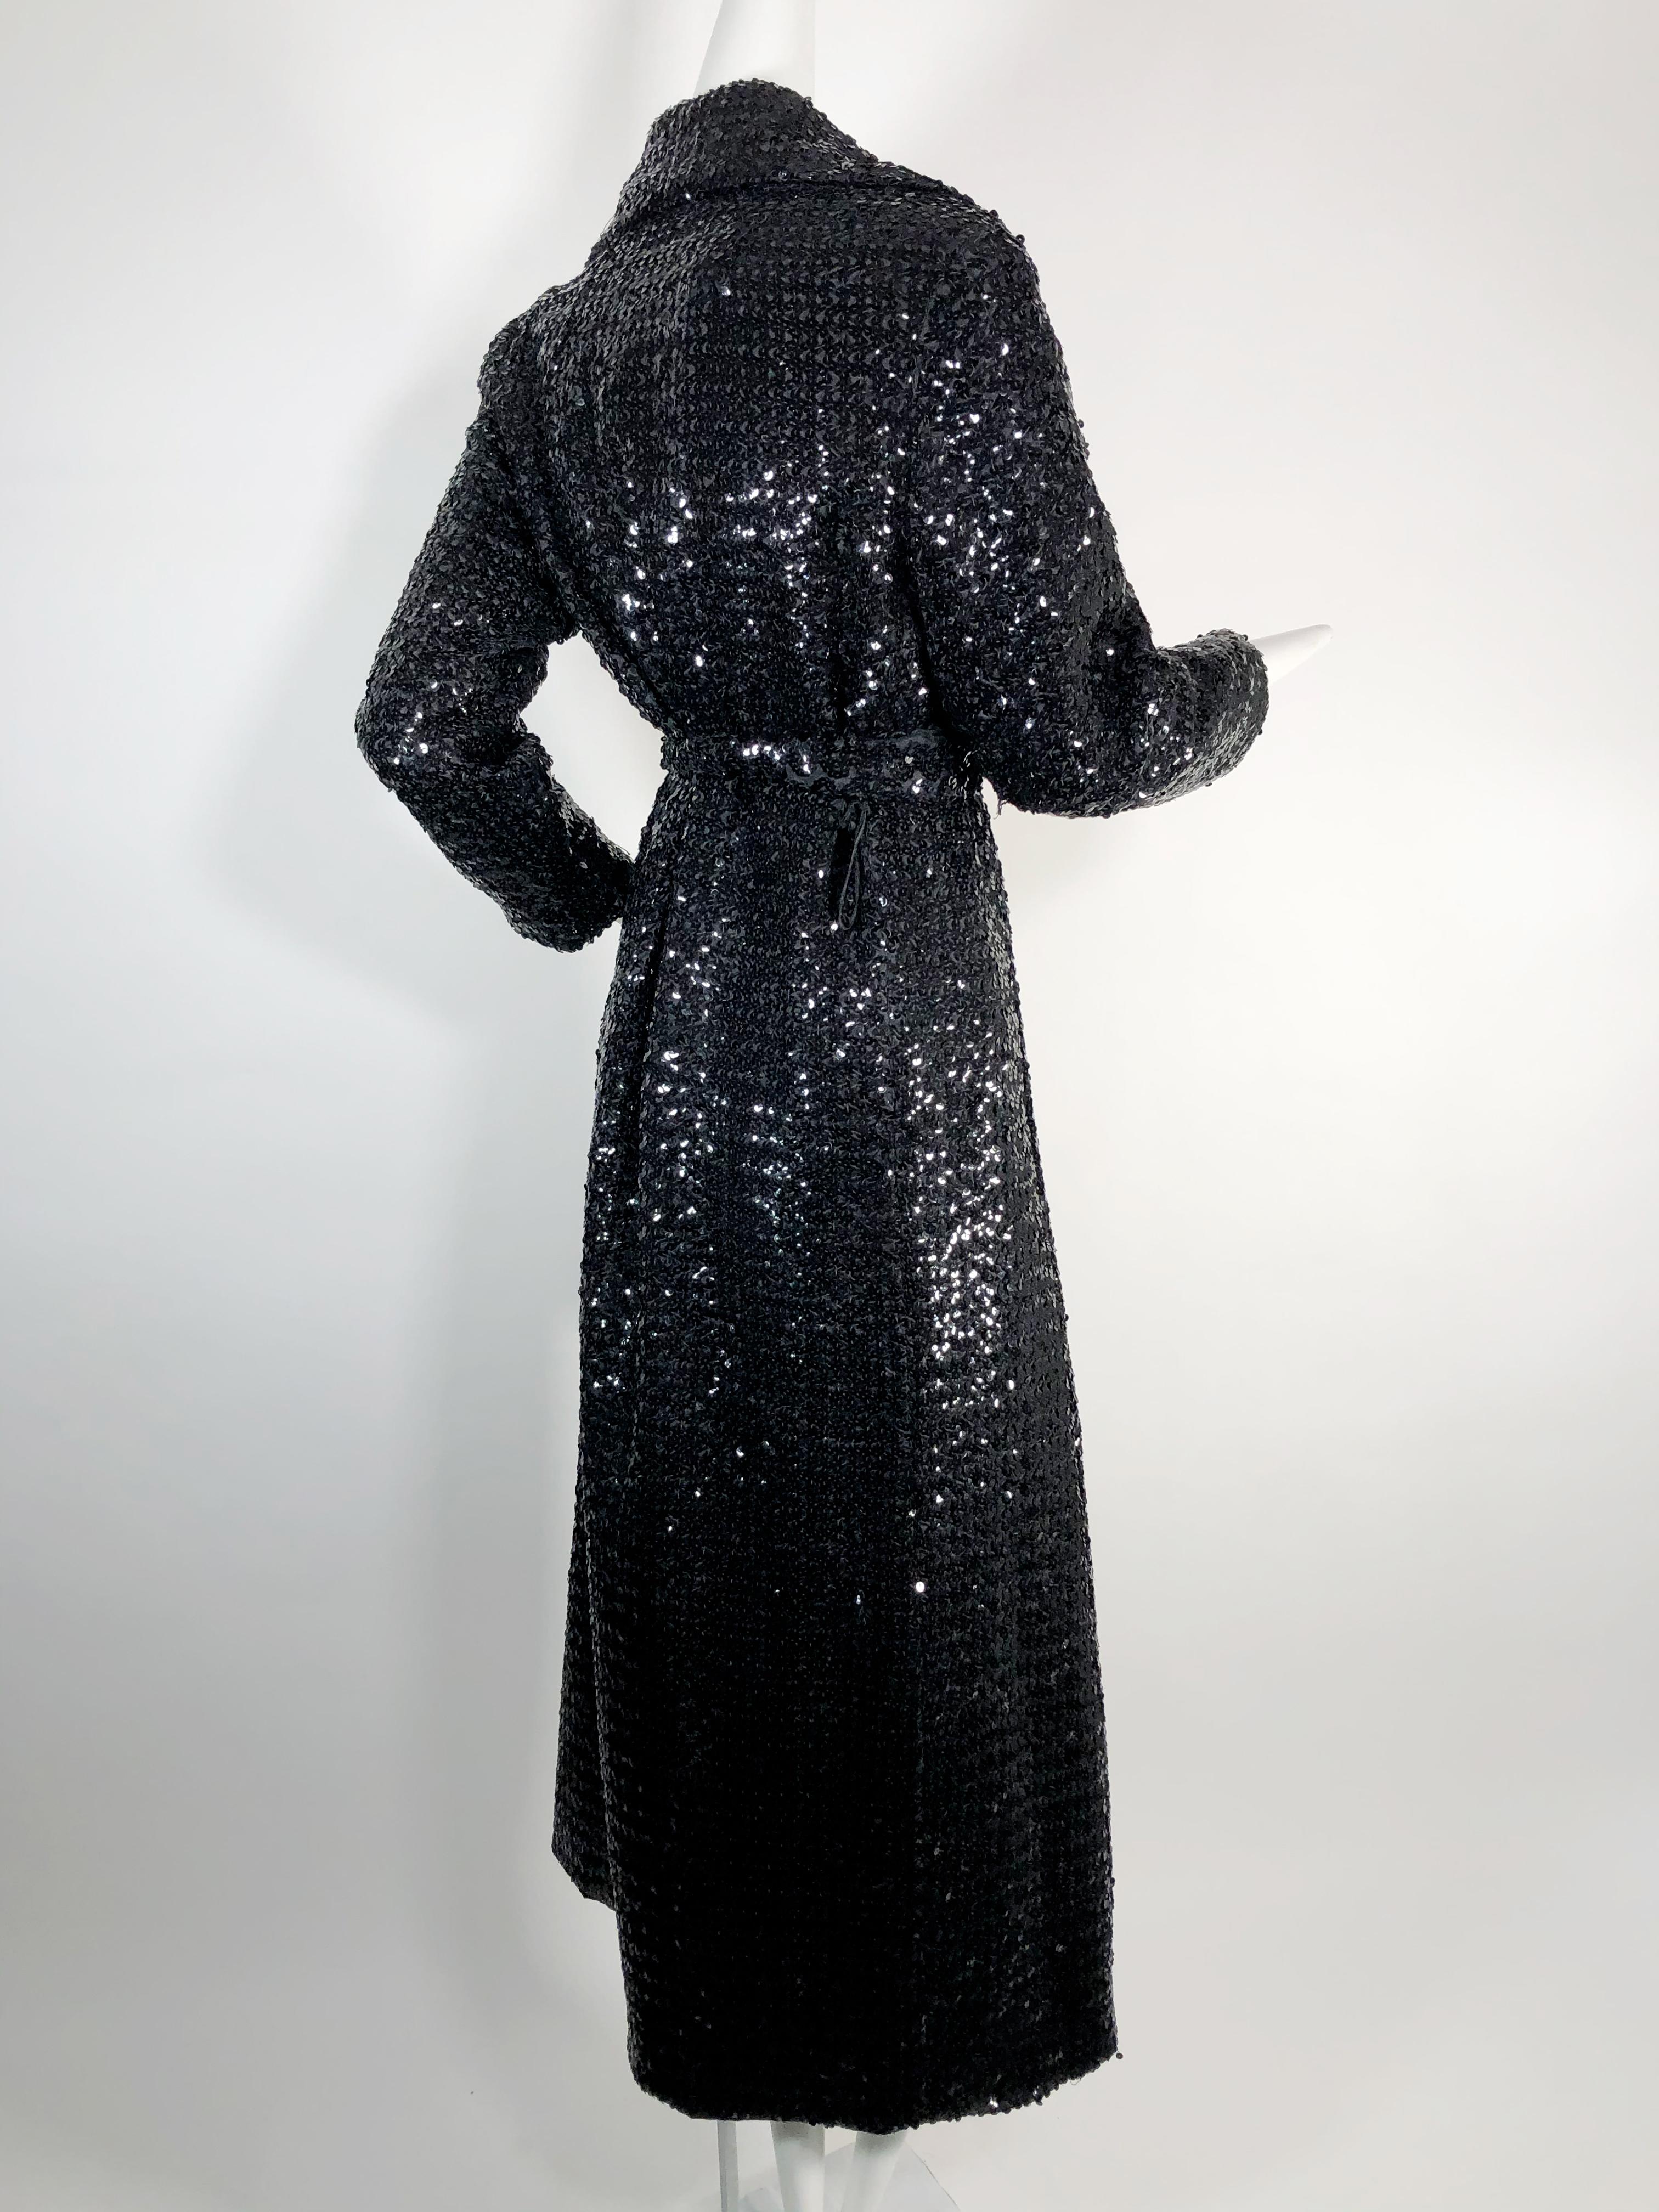 Wrapping this fabulous 1970s black sequin maxi-length trench coat around oneself is heaven with its heavy satin lining and generous notched collar! Original belt included. Fits approximately a US size medium.